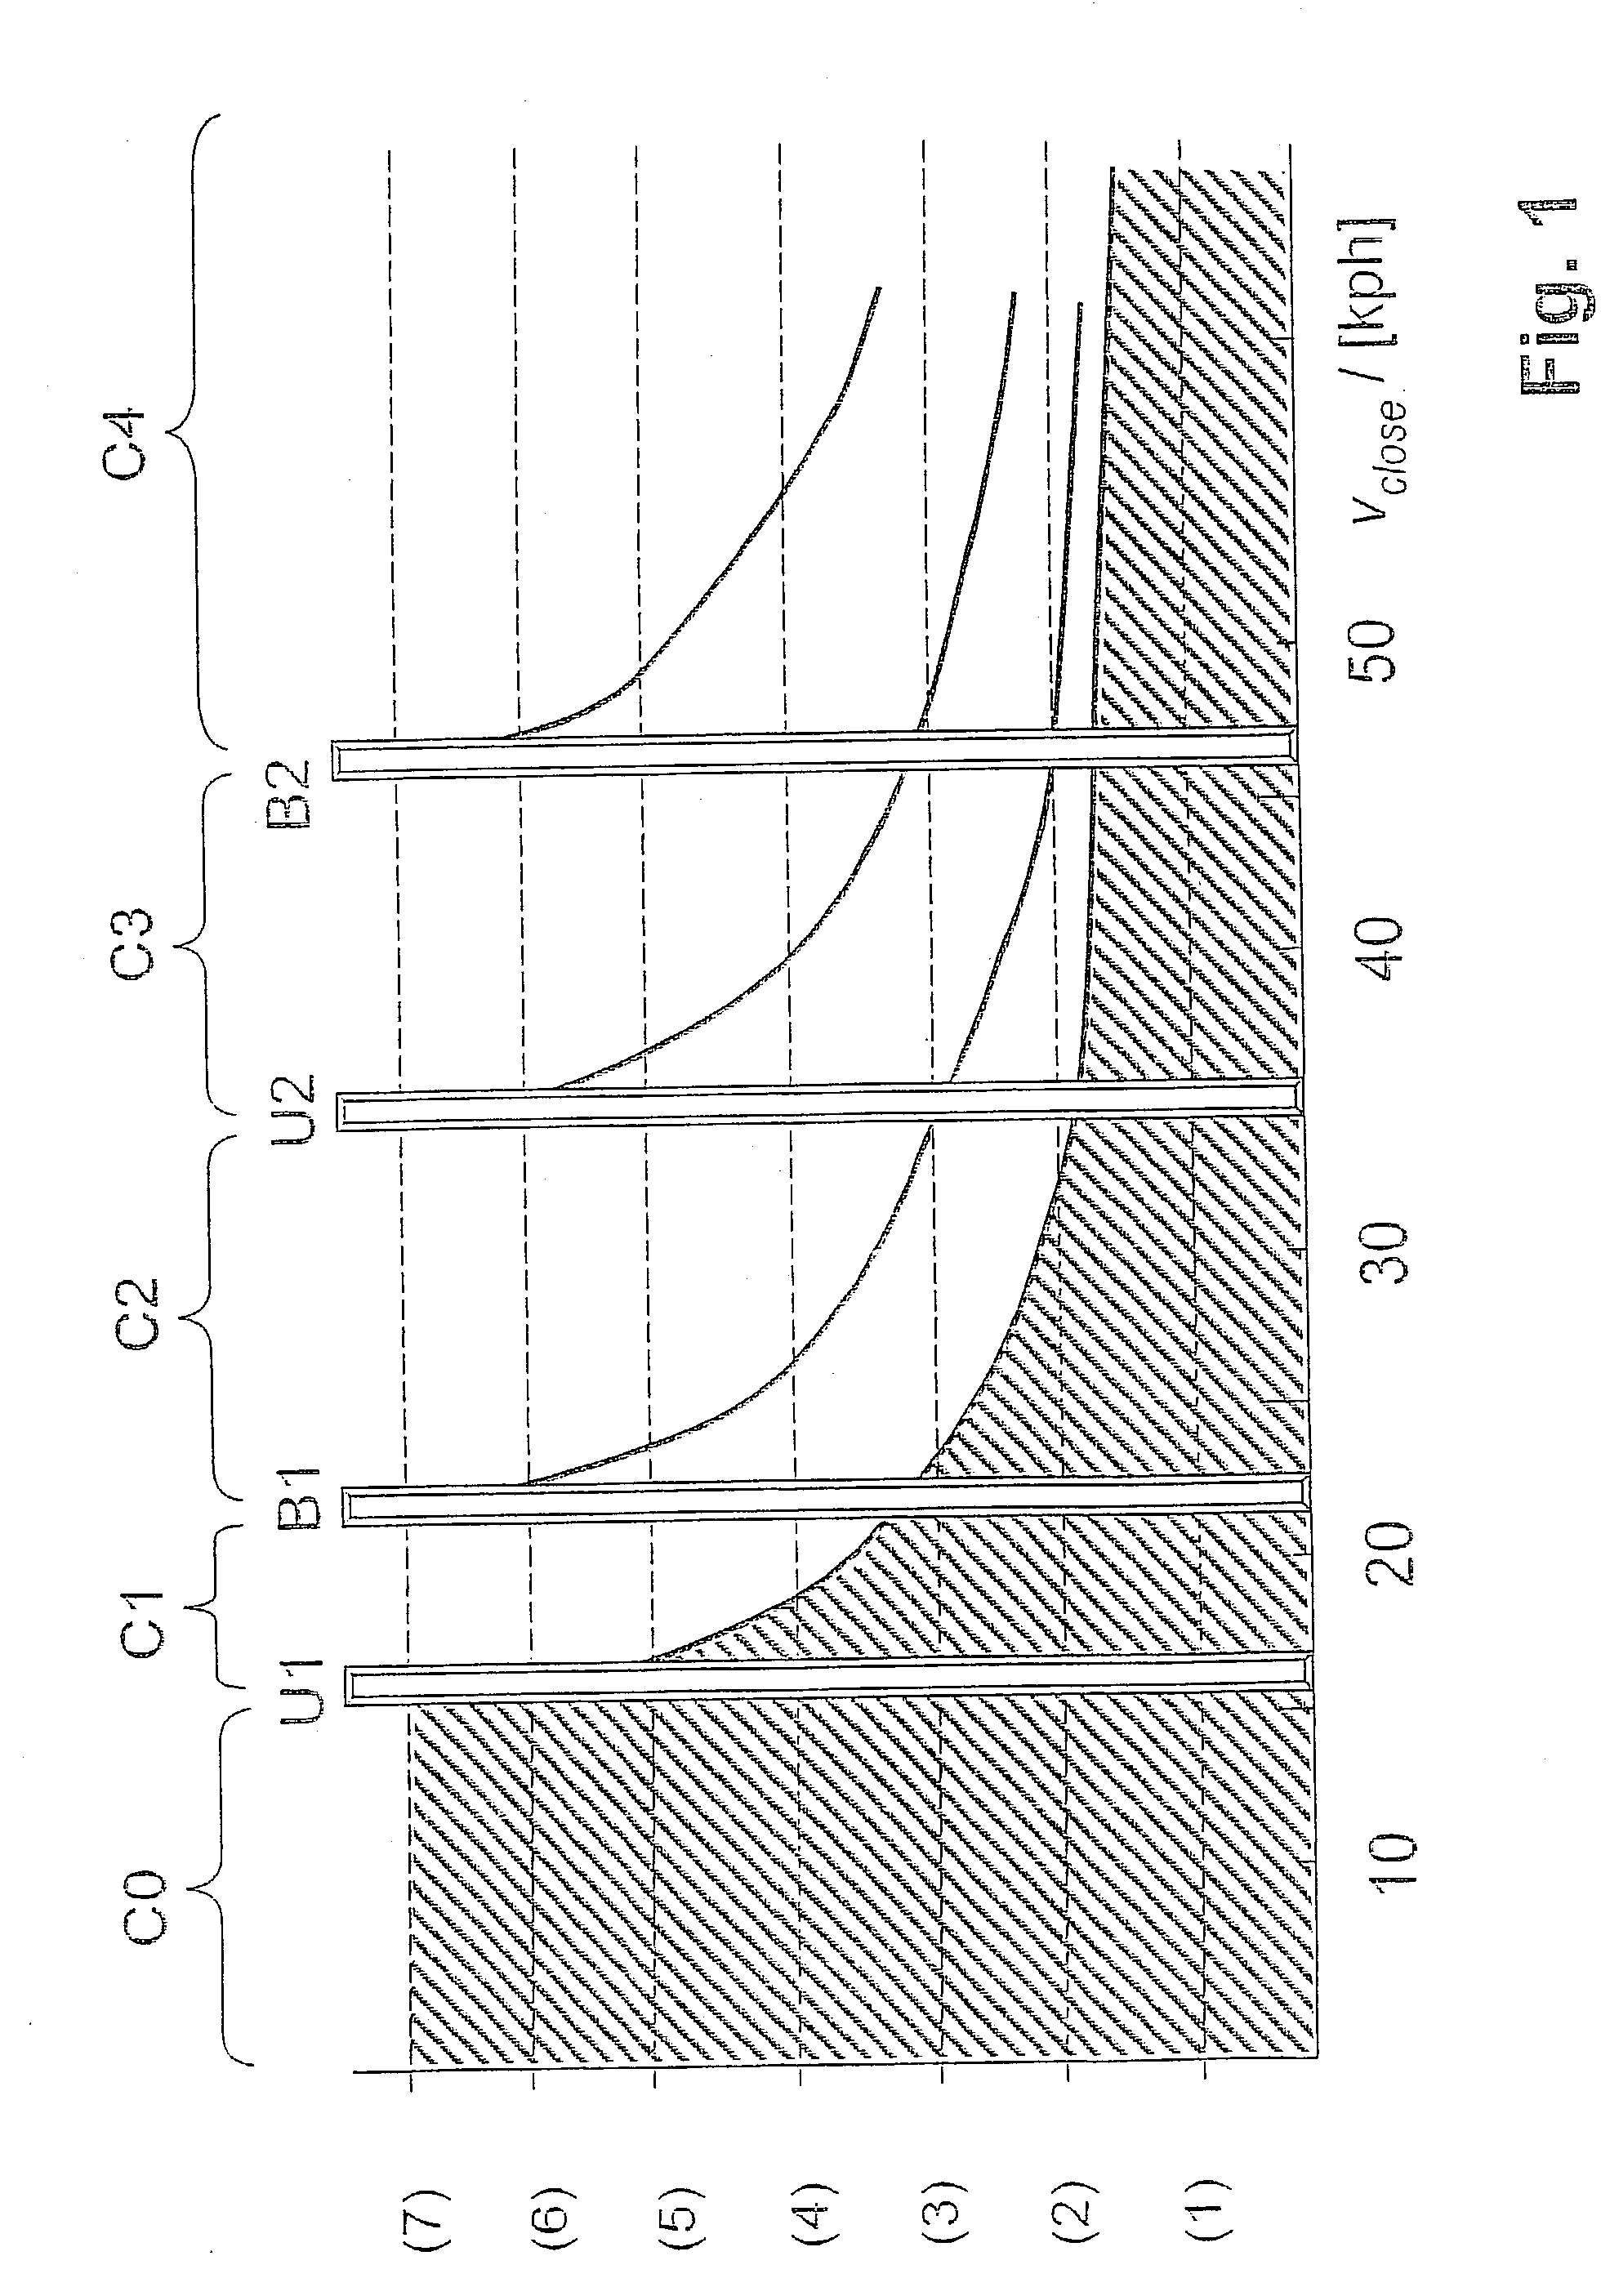 Method for triggering means of restraint in a motor vehicle